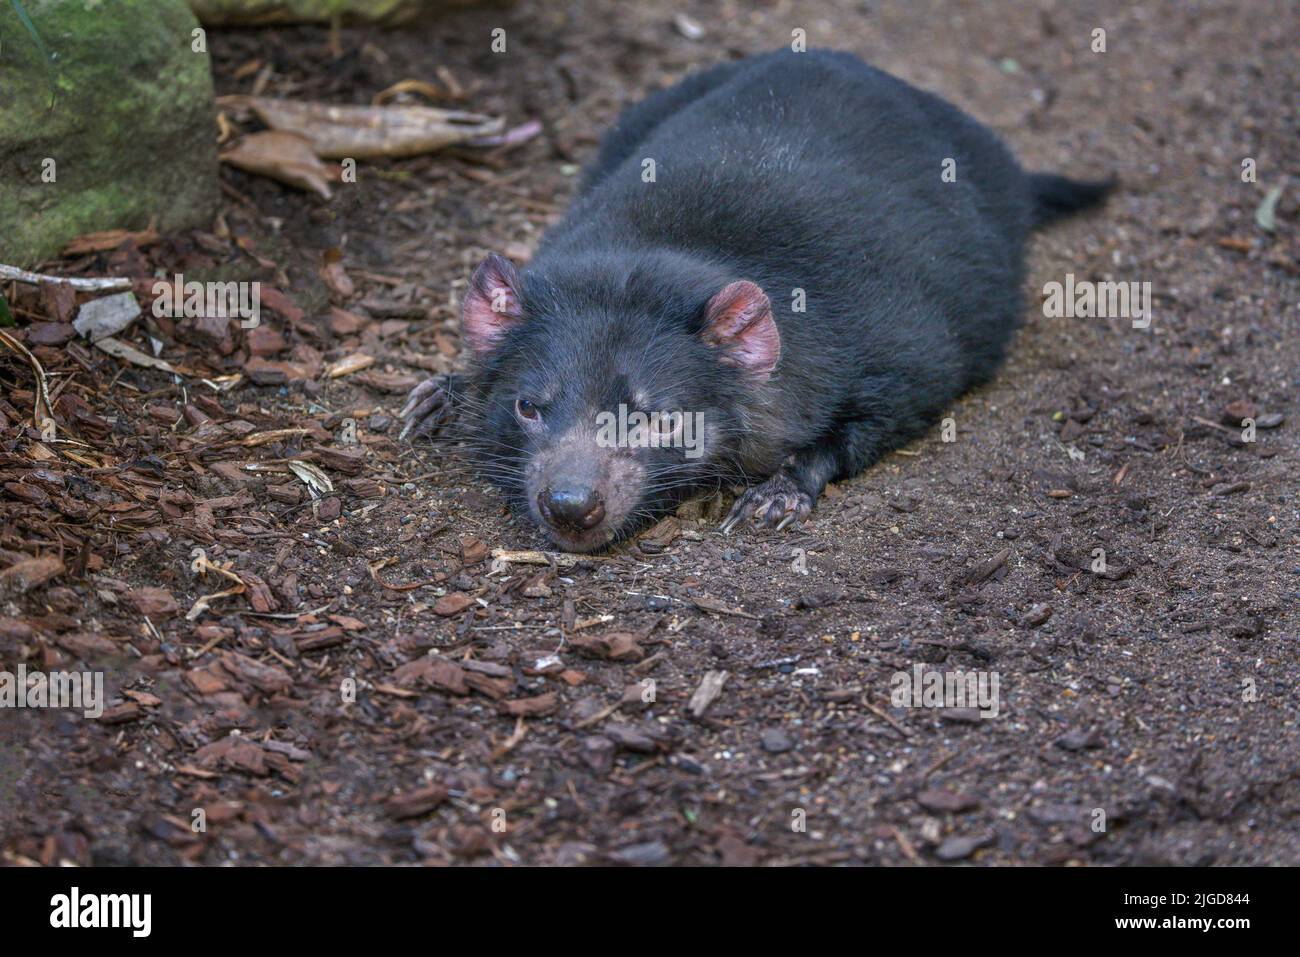 Tasmanian Devil (Sarcophilus harrisii) resting on the ground. These native carnivorous Australian marsupials have been declared an endangered species. Stock Photo